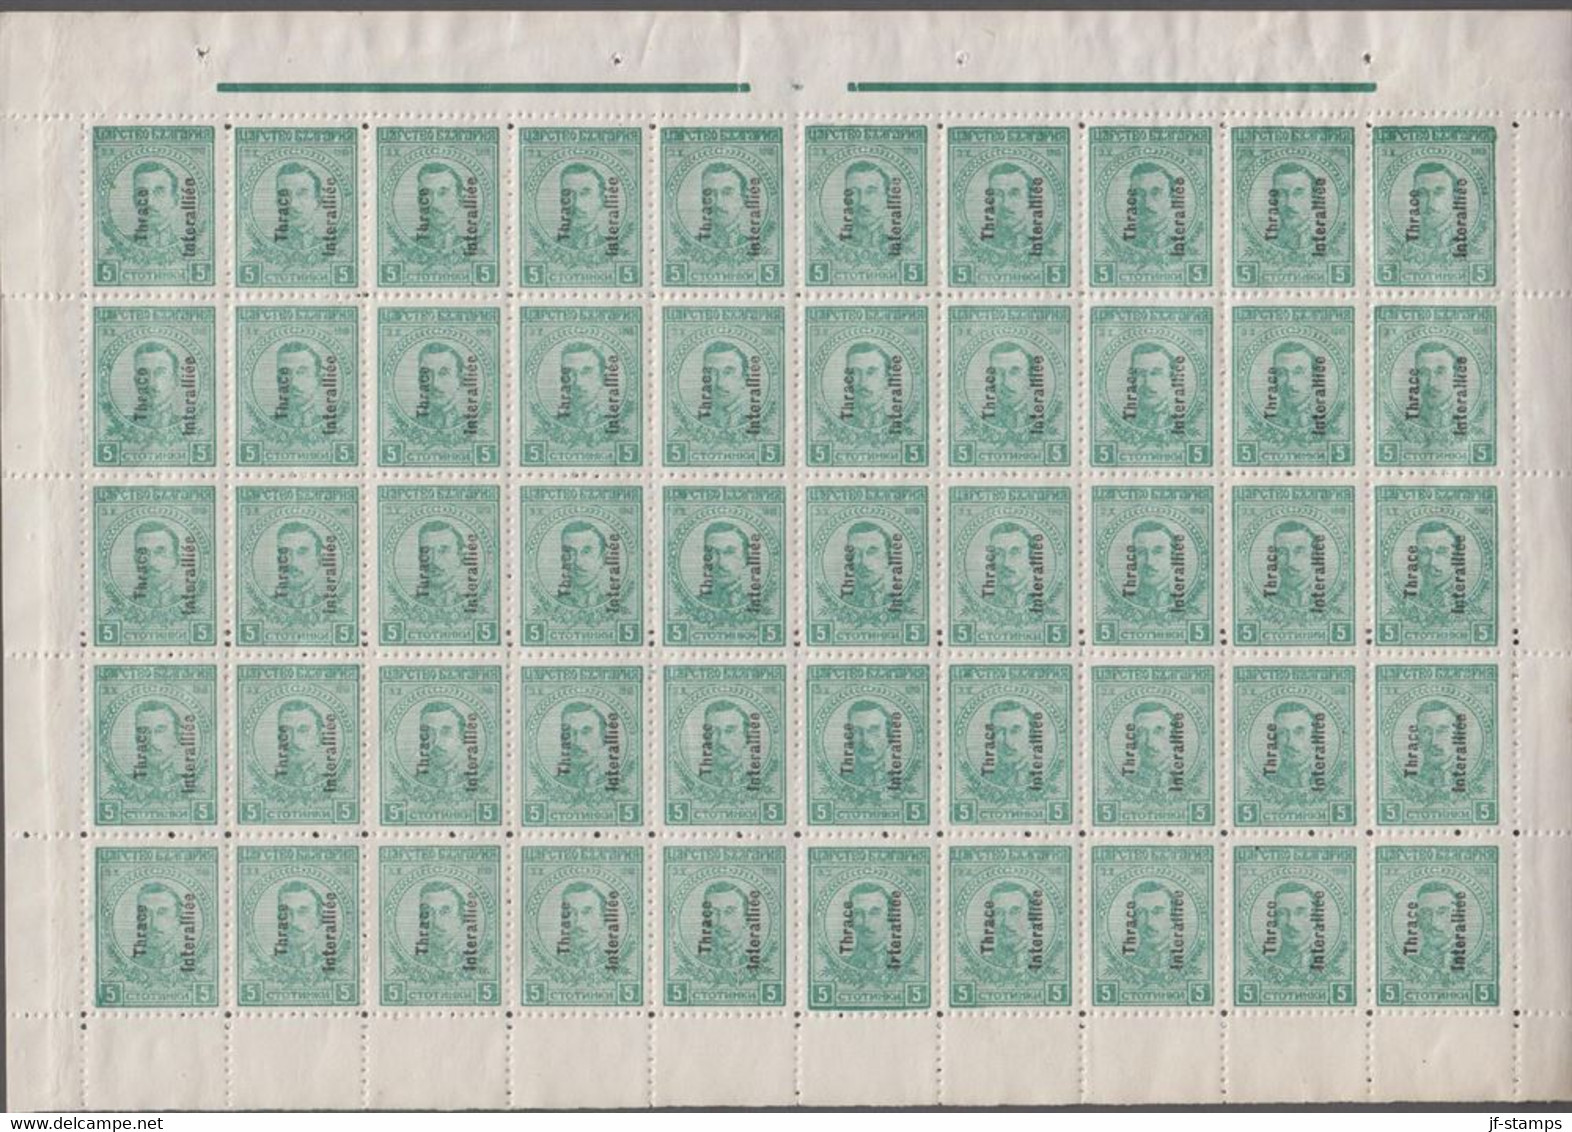 1920. THRACE INTERALLIEE. Bulgarian 5 St In Complete Sheet With 50 Stamps With Overprint Thrac... (Michel 16) - JF527355 - Thrakien